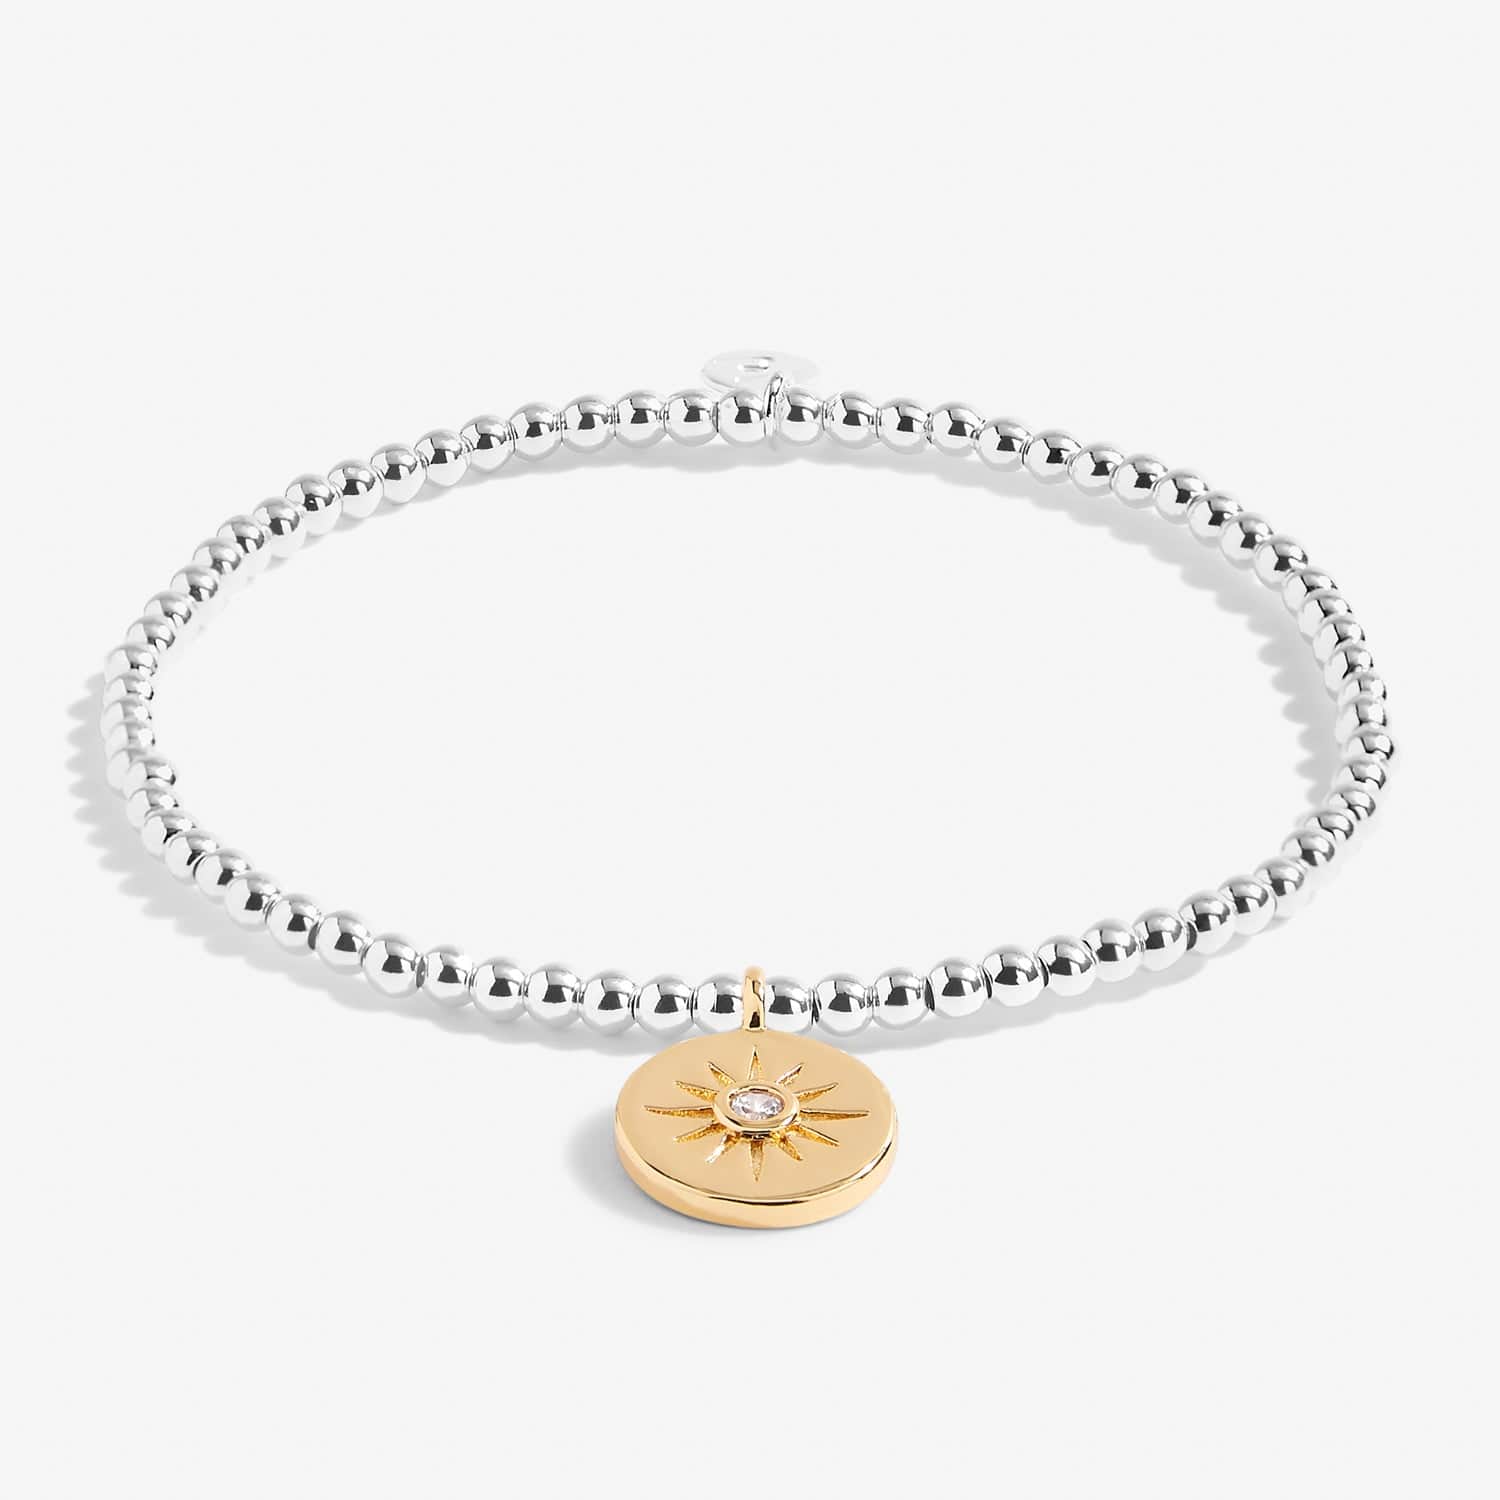 Joma Jewellery Bracelets Joma Jewellery Bracelet - A little You're The Best